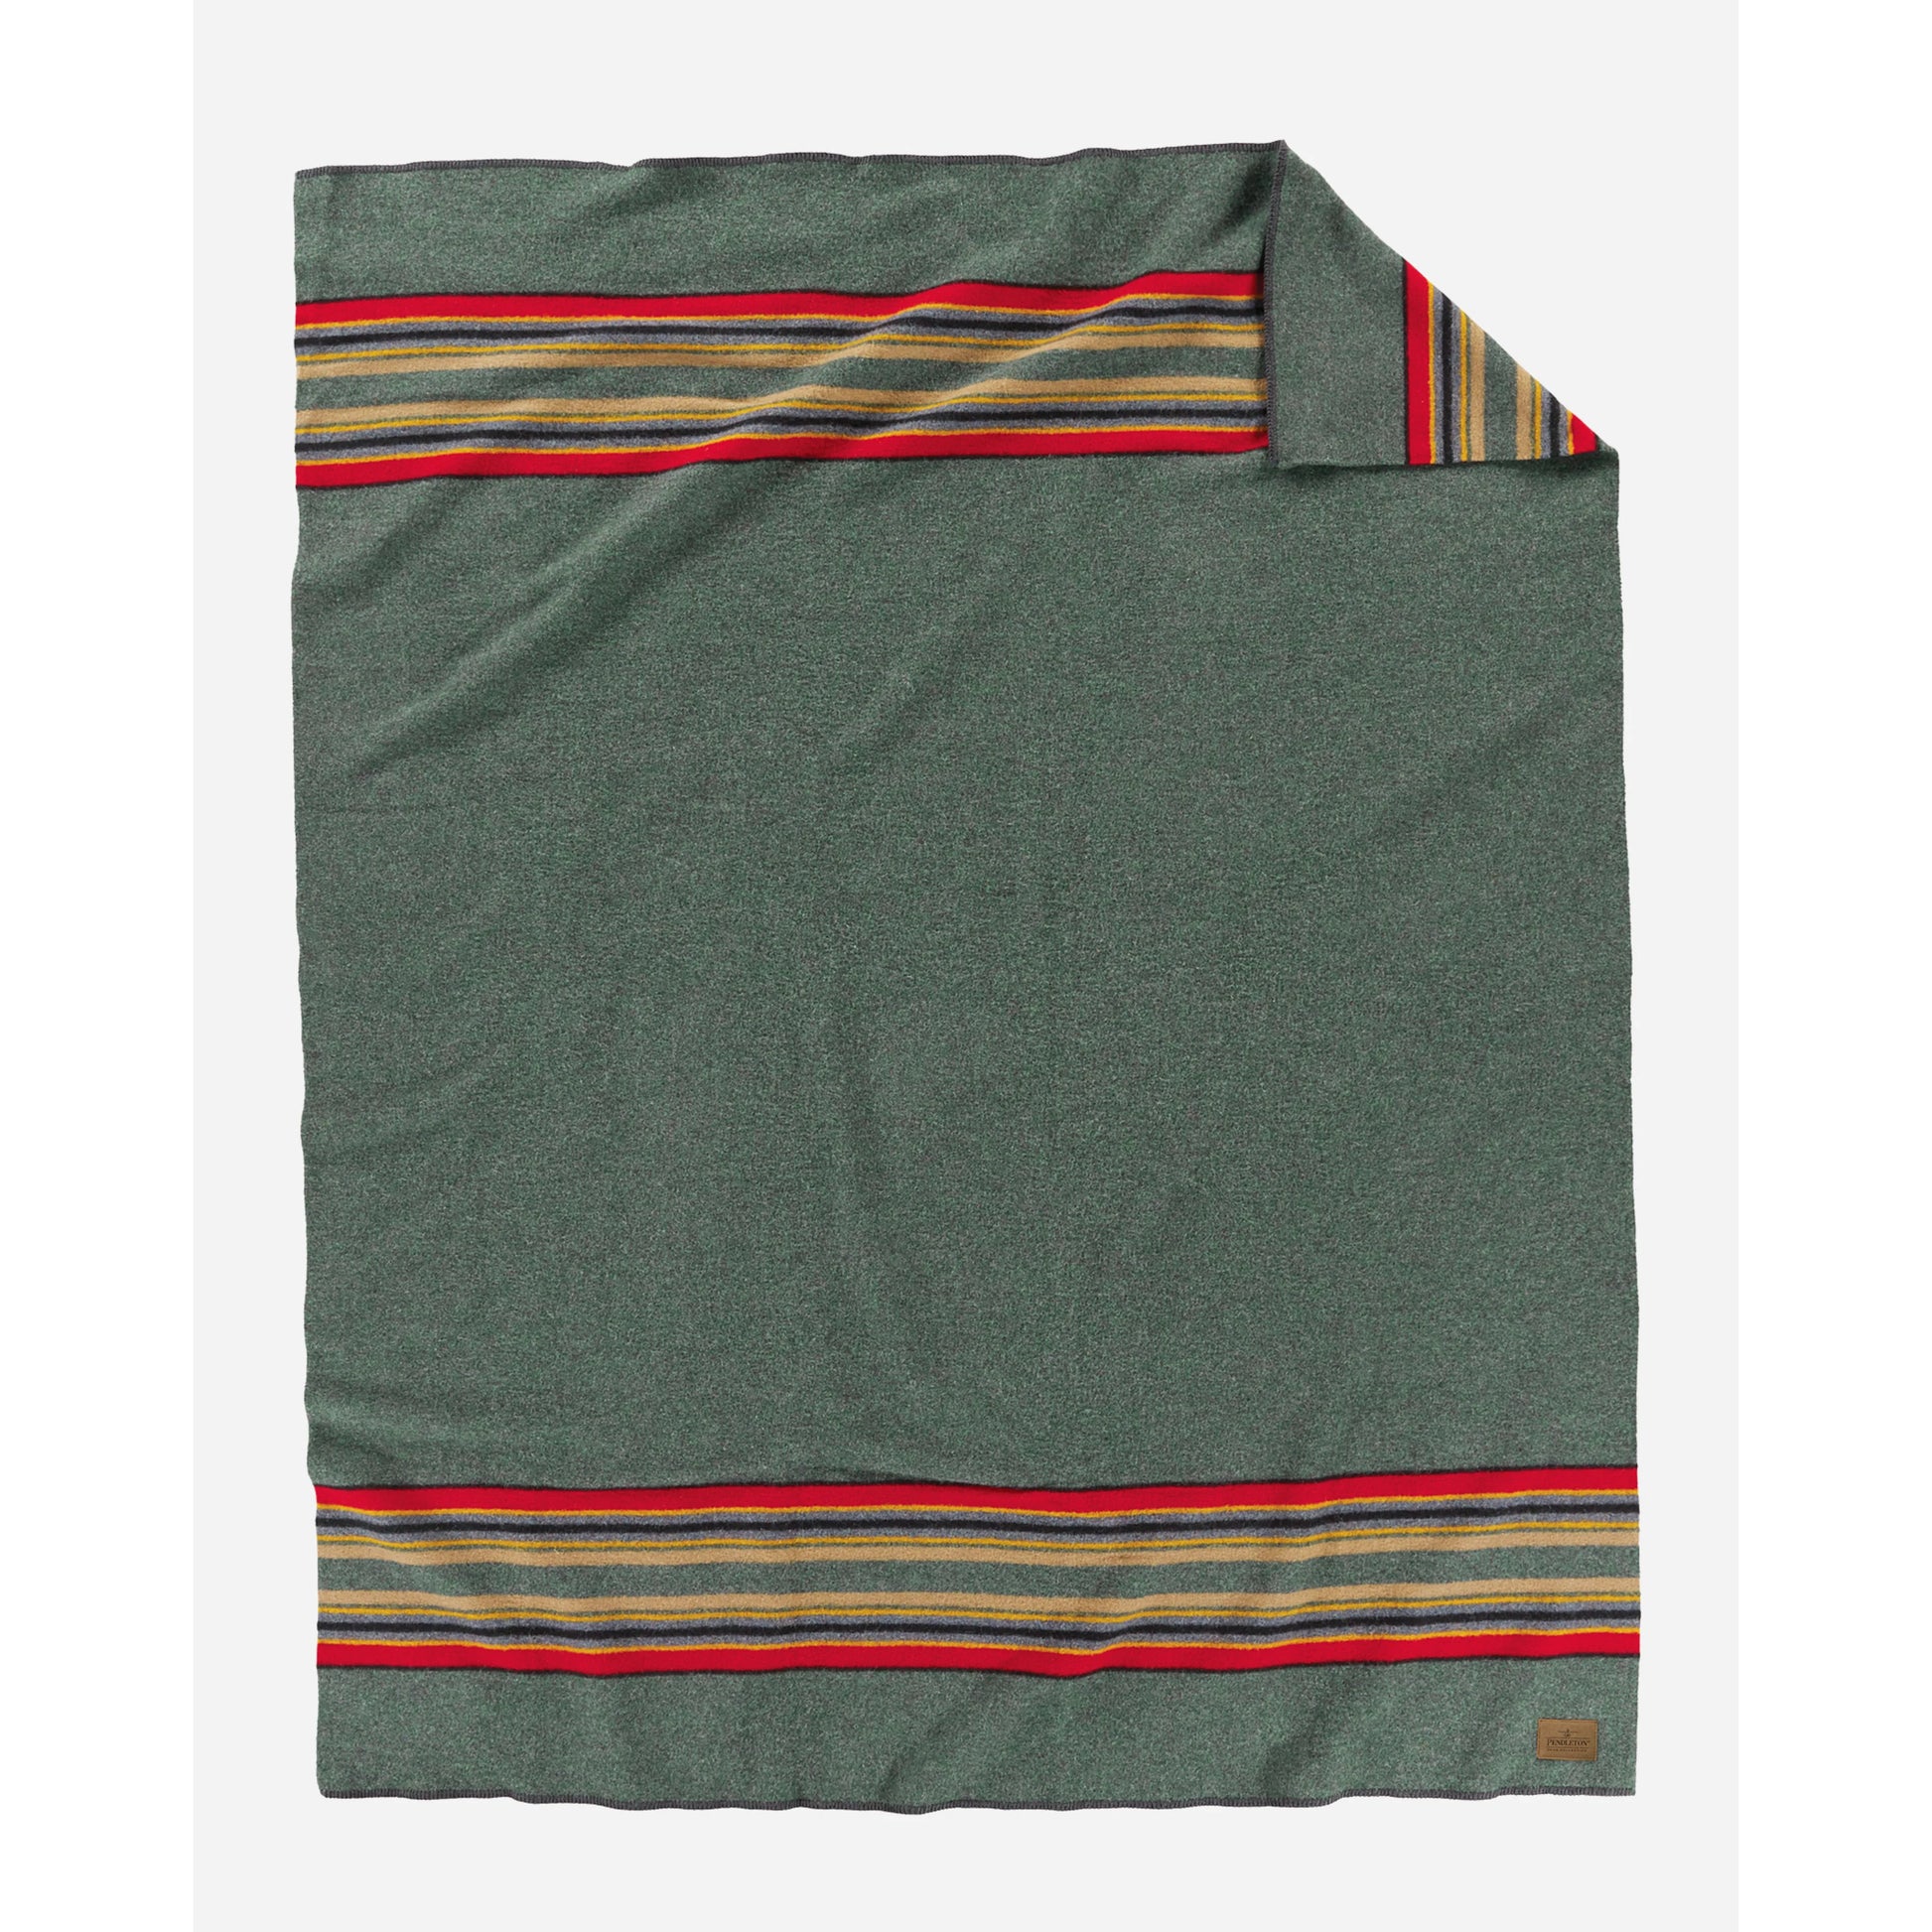 Pendleton blanket - green heather with red, blue and yellow stripes and logo 